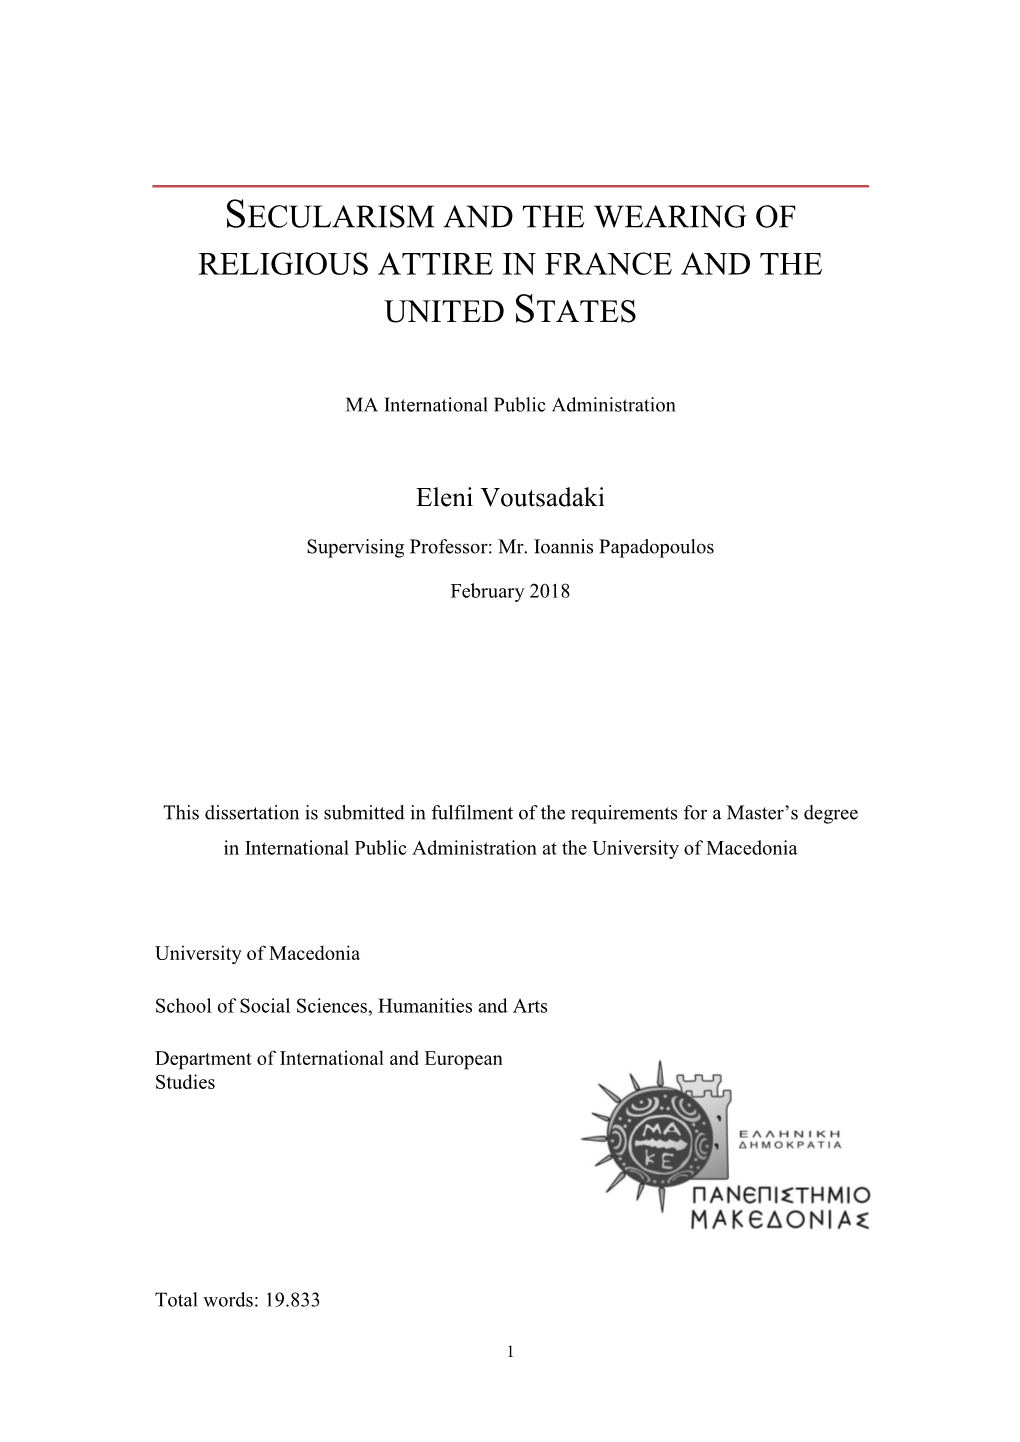 The Principle of Secularism in France and the United States